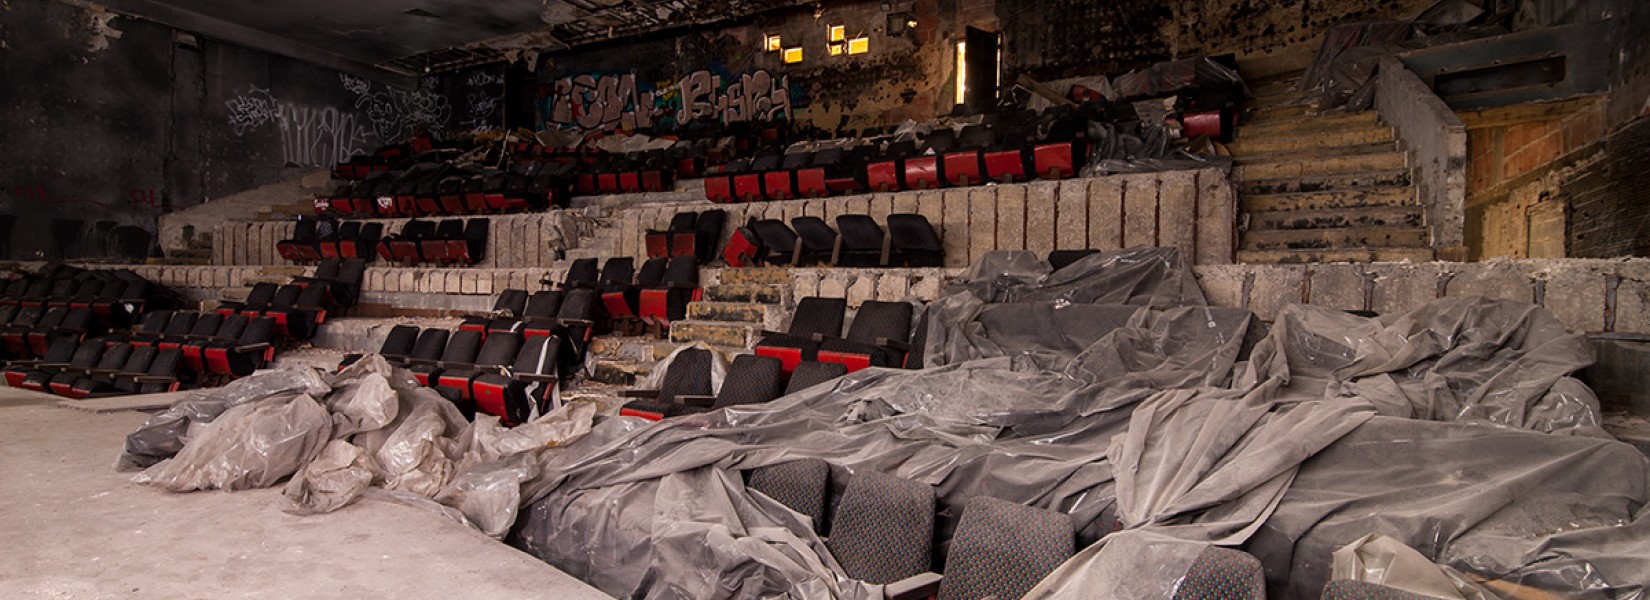 The abandoned theater